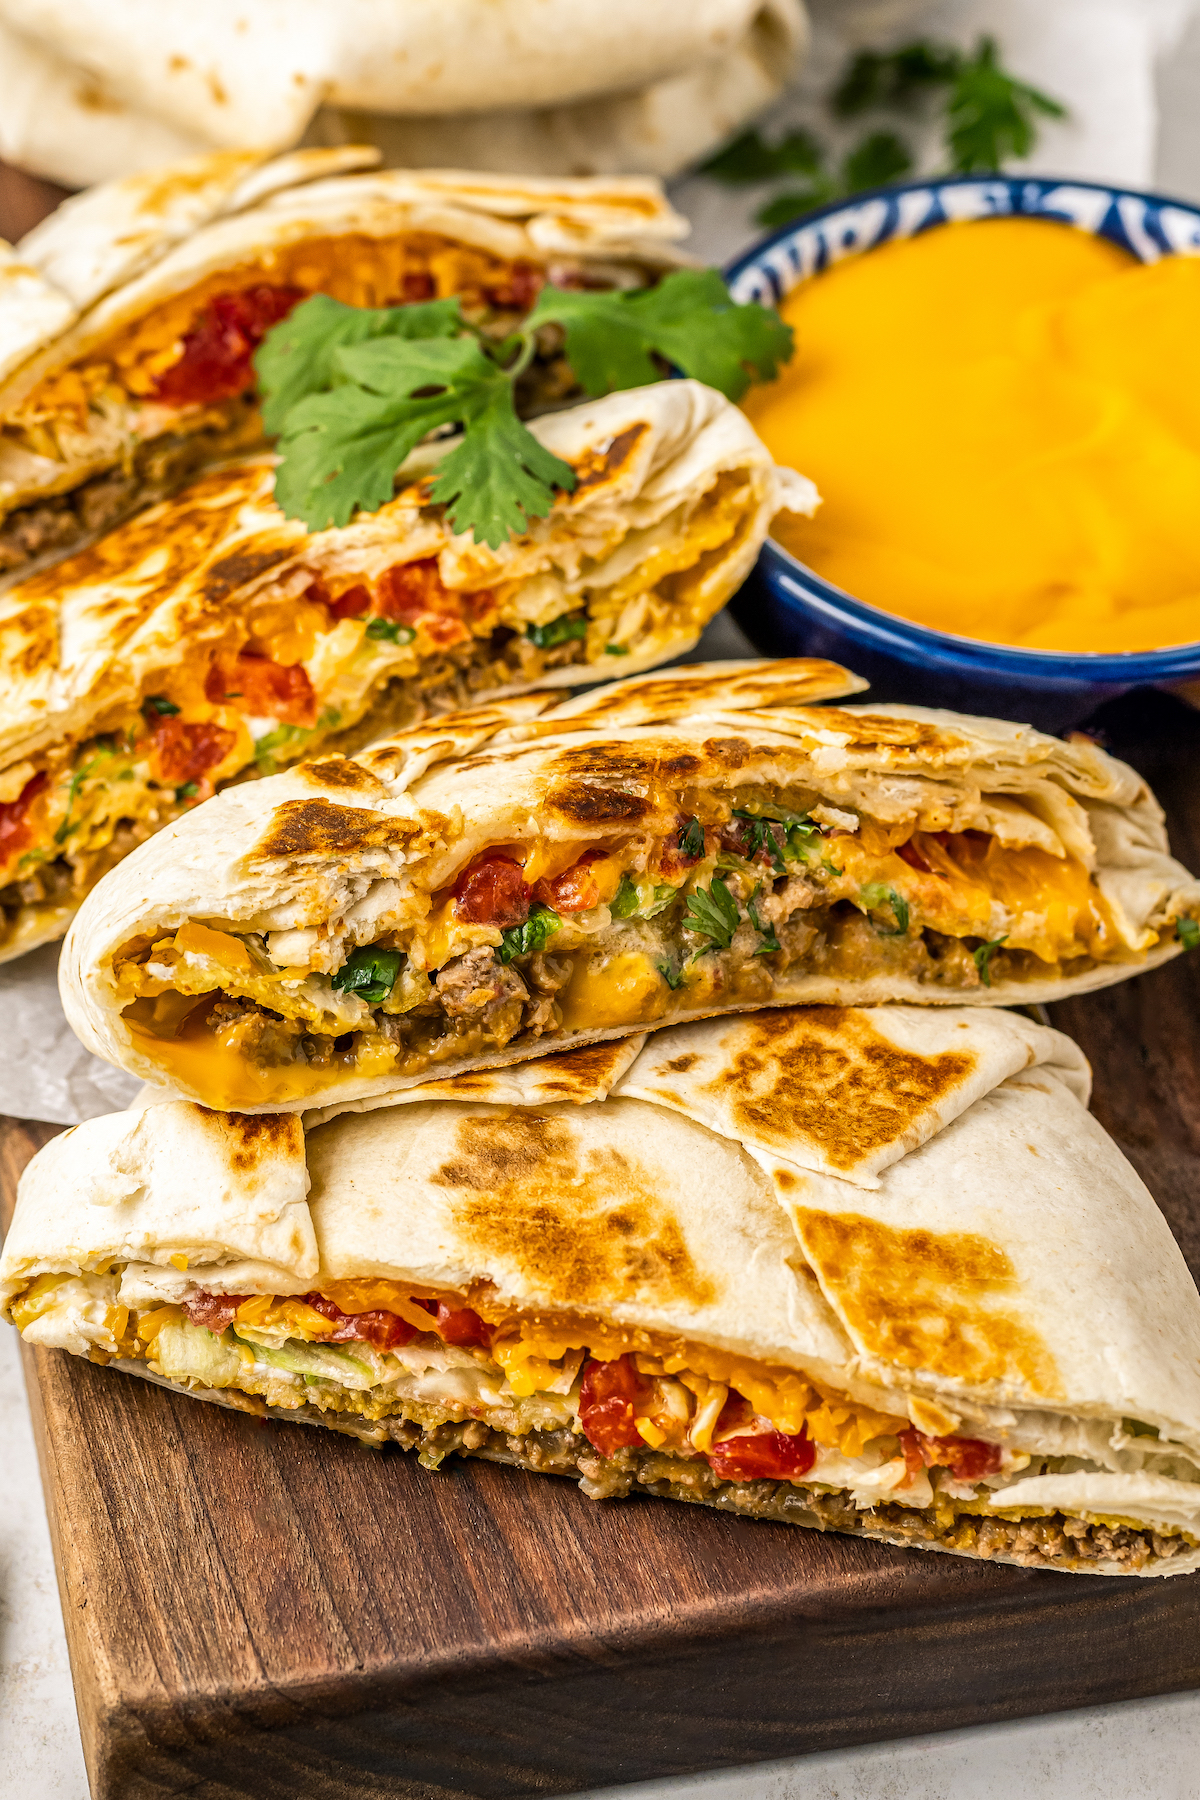 A Crunchwrap Supreme is sliced to show the inside near a bowl of queso dip.